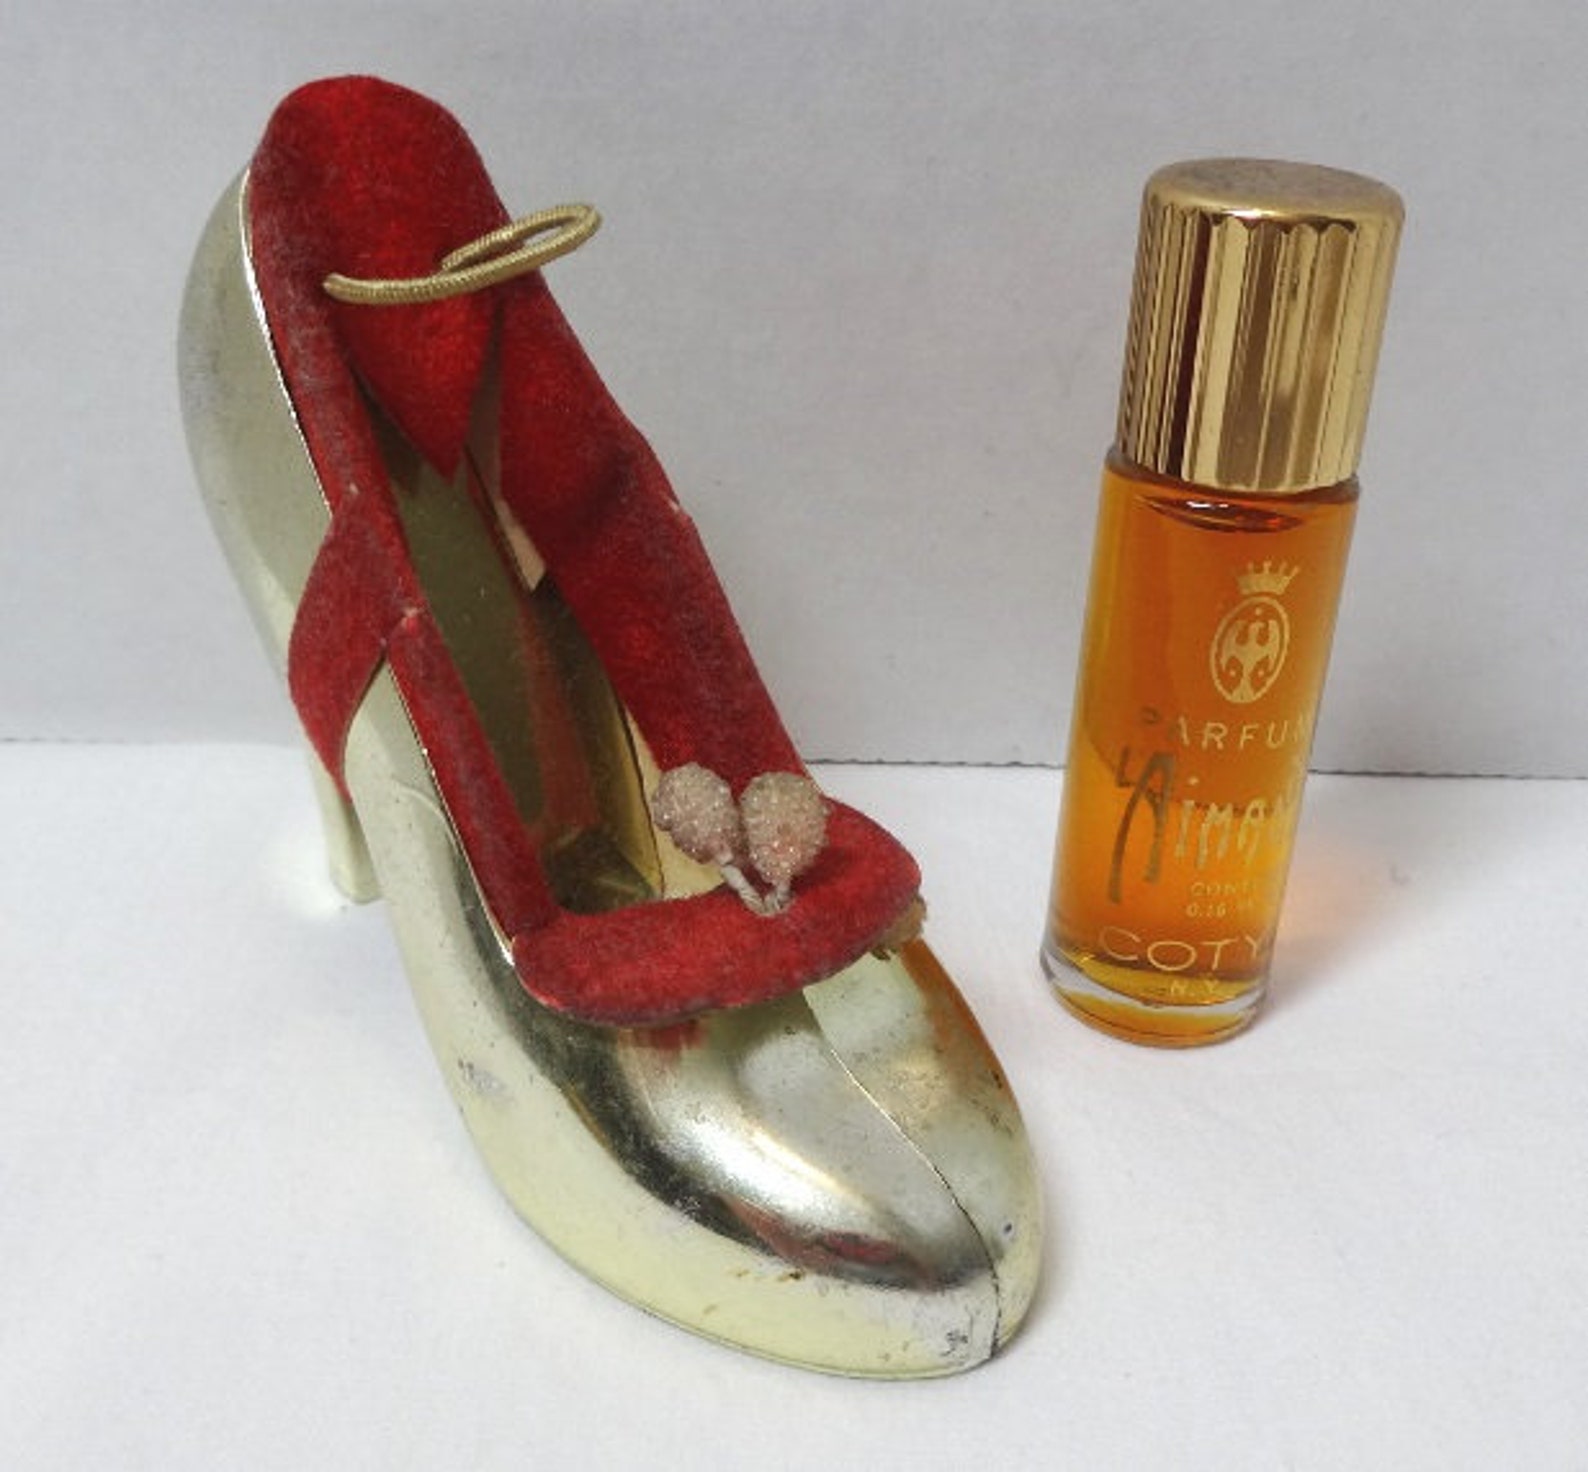 1950s L'Aimant Parfum with Shoe By Coty .16 oz. Full | Etsy